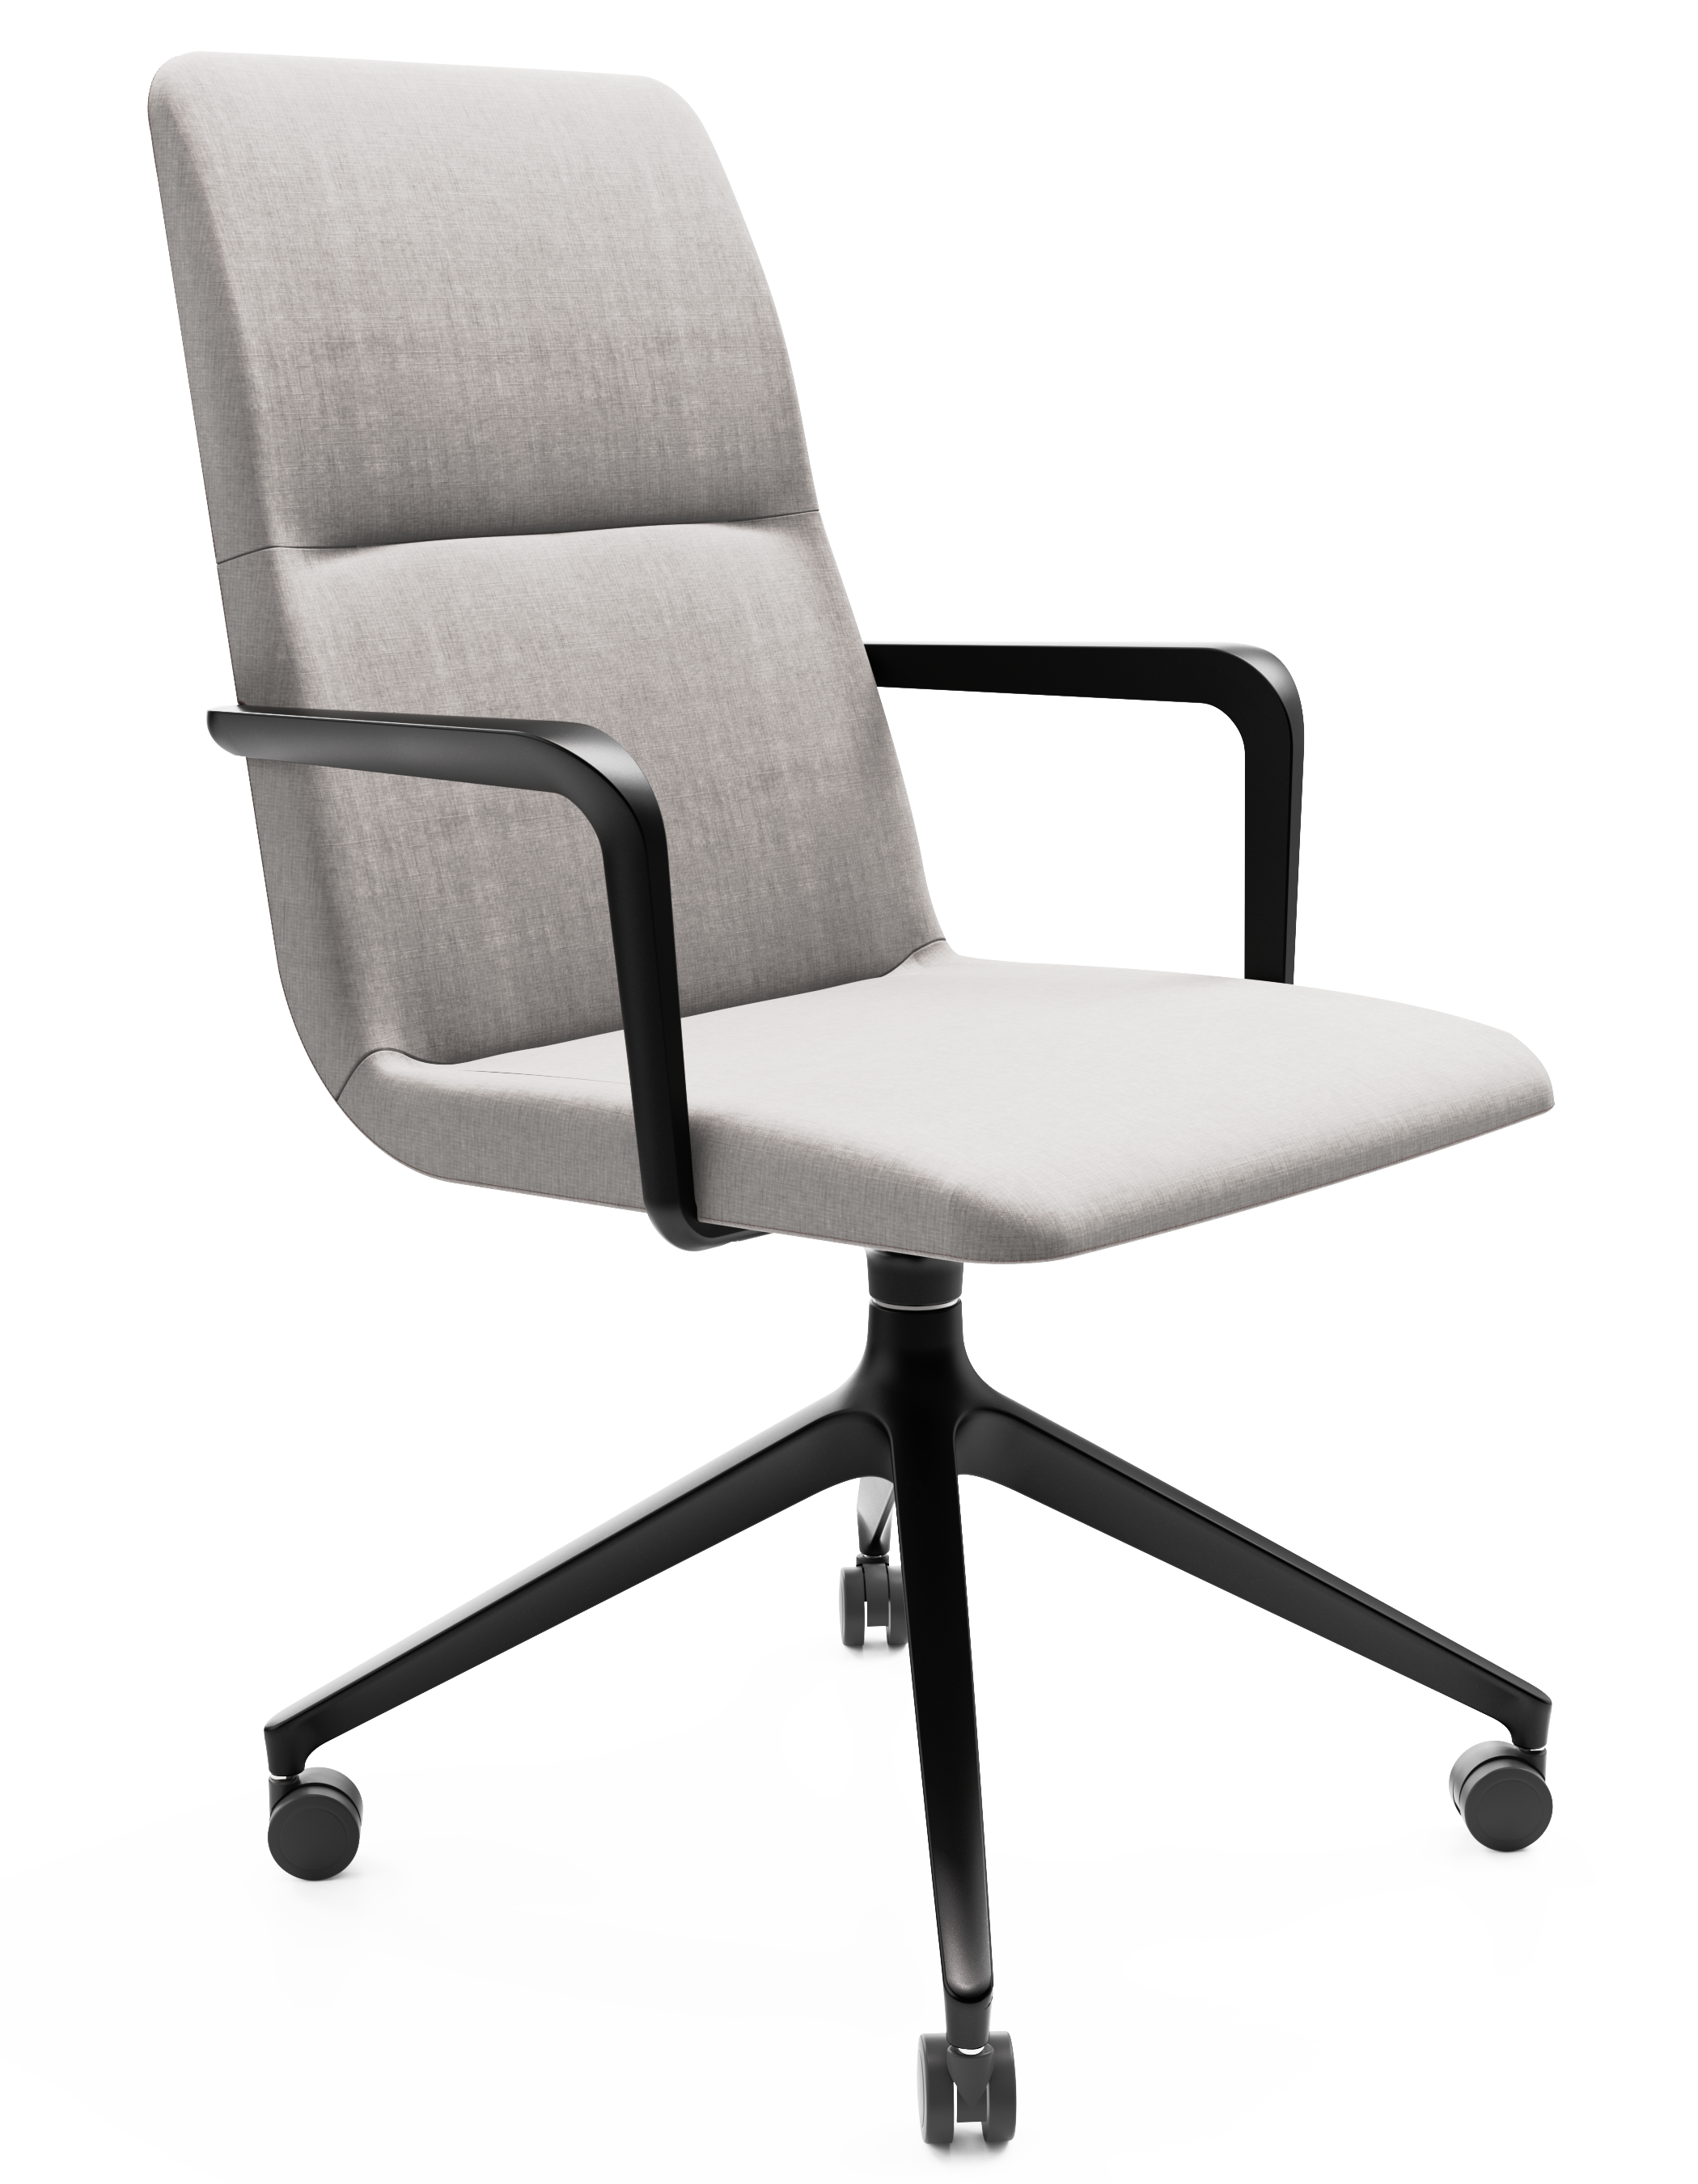 WS - Accord with arms 4 star pyramid base chair with castors - black - remix 126 - front angle